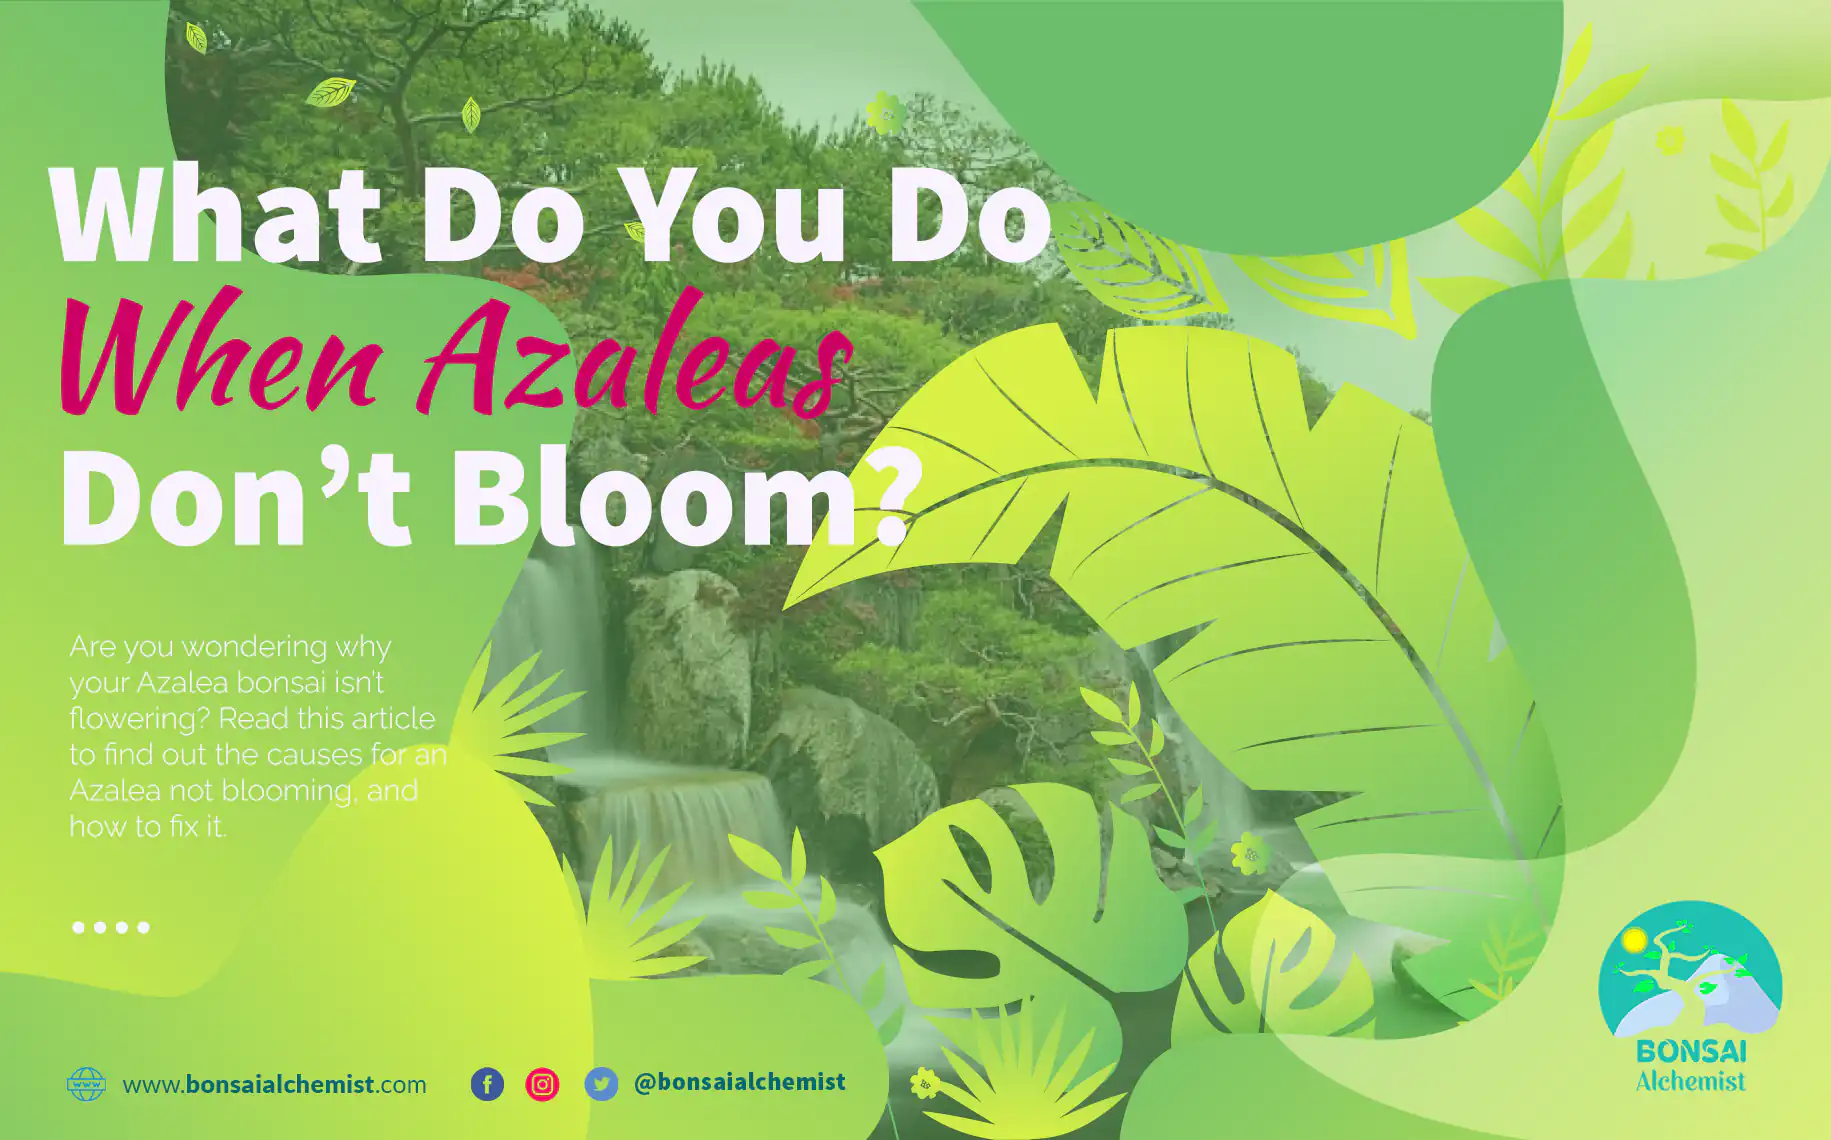 What Do You Do When Azaleas Don’t Bloom